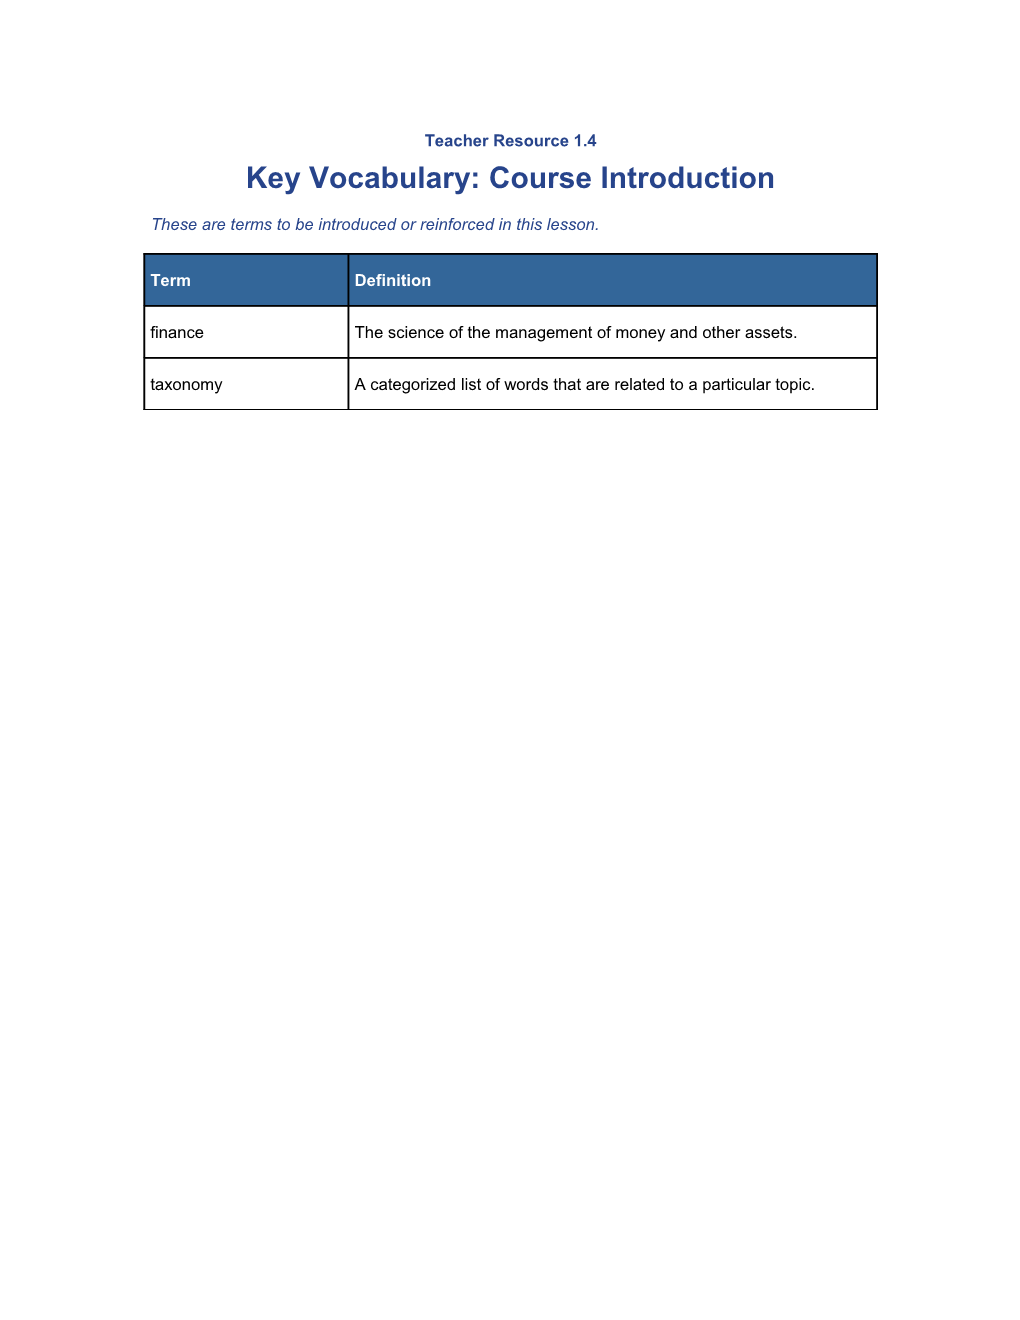 Key Vocabulary: Course Introduction